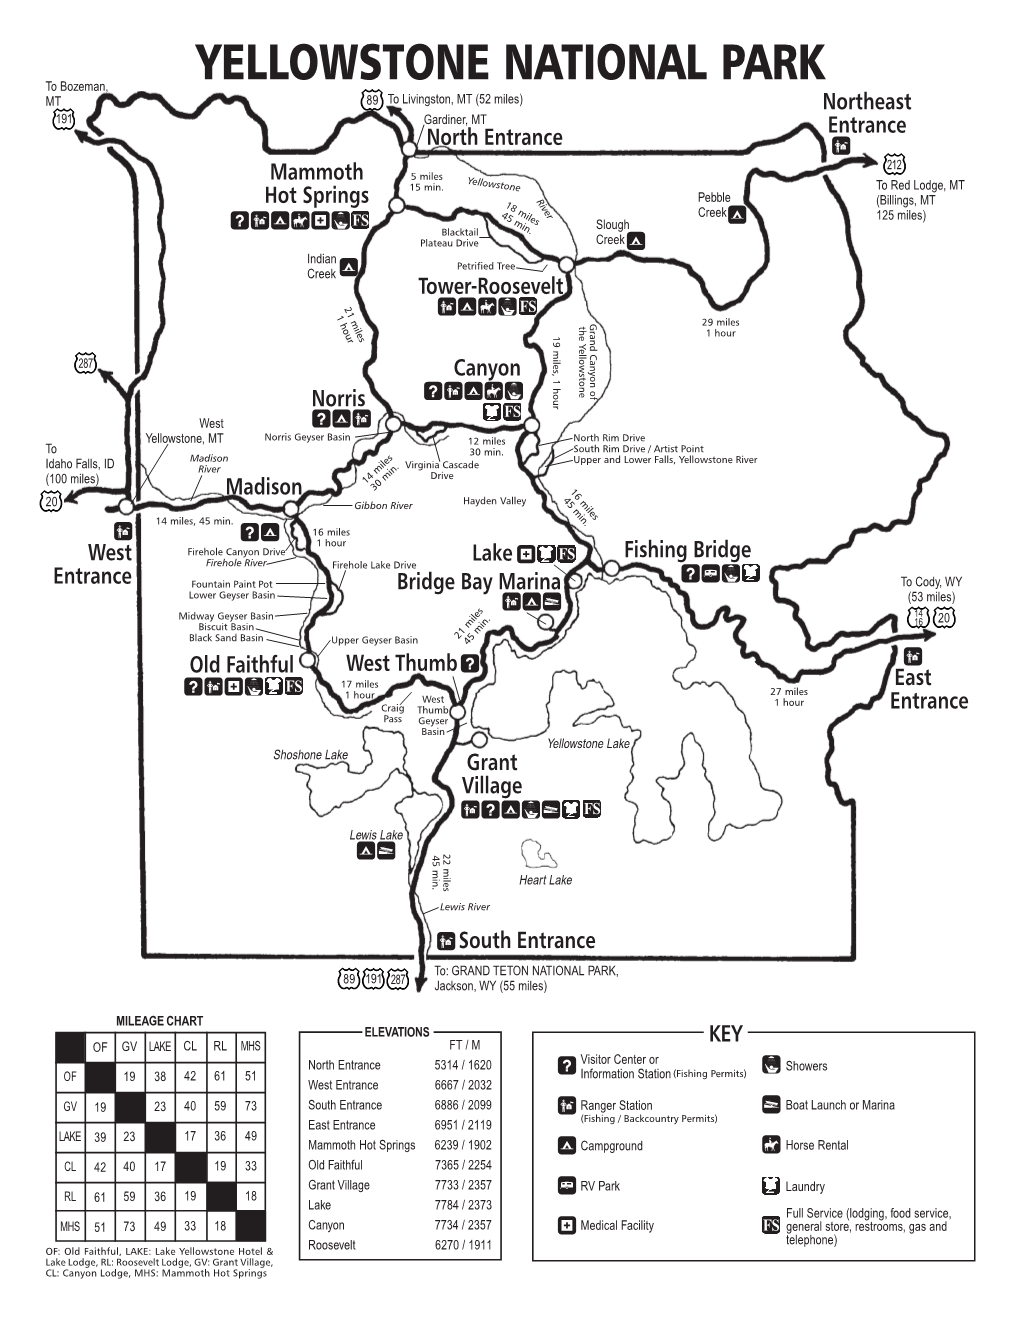 Yellowstone Park Map with Mileage